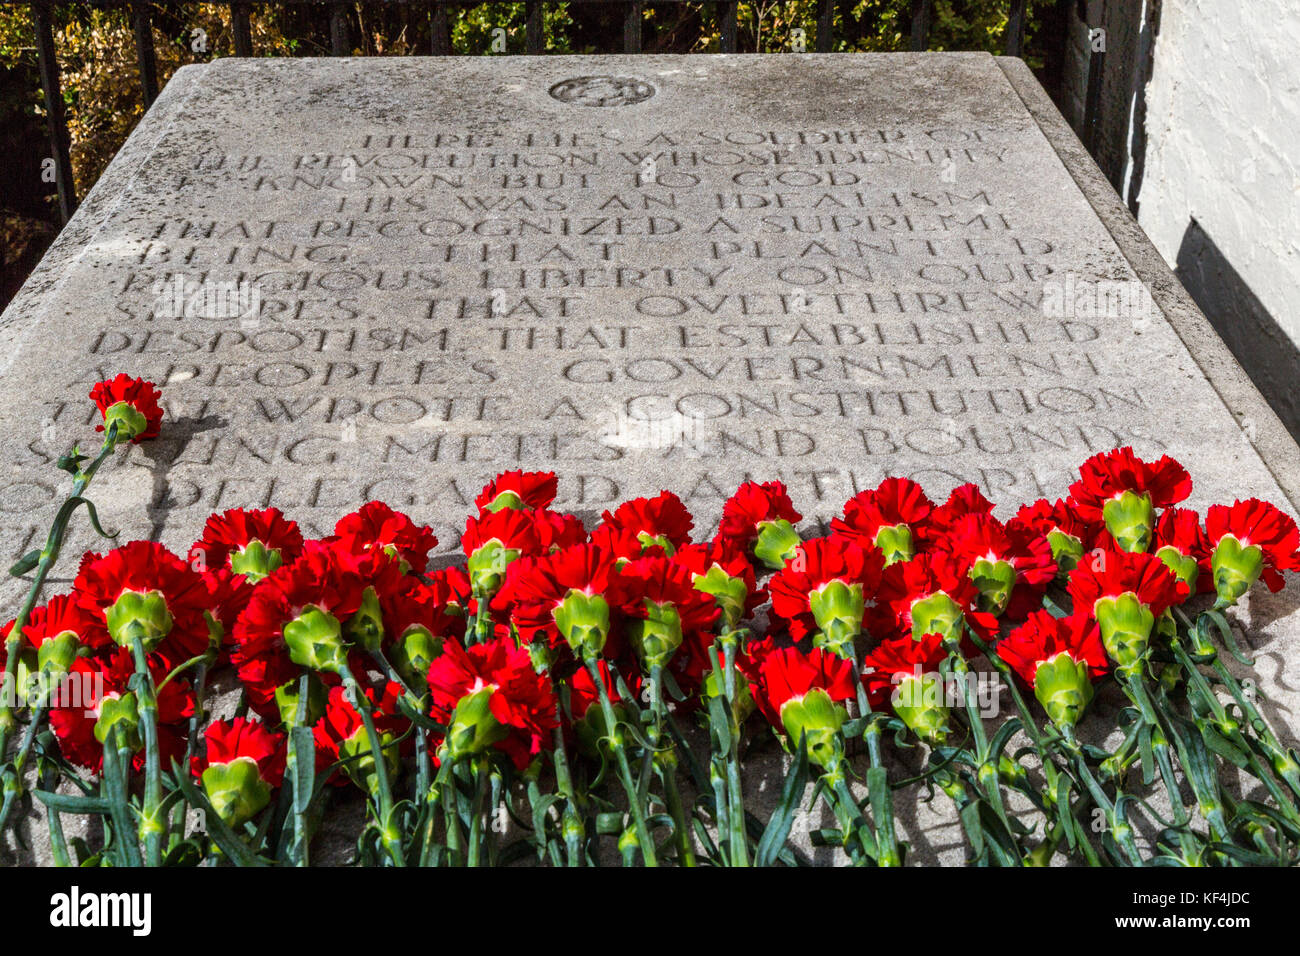 Alexandria, Virginia, USA.  Carnations on the Grave of the Unknown Soldier of the American Revolutionary War.  Presidents Day Ceremony, 2017. Stock Photo